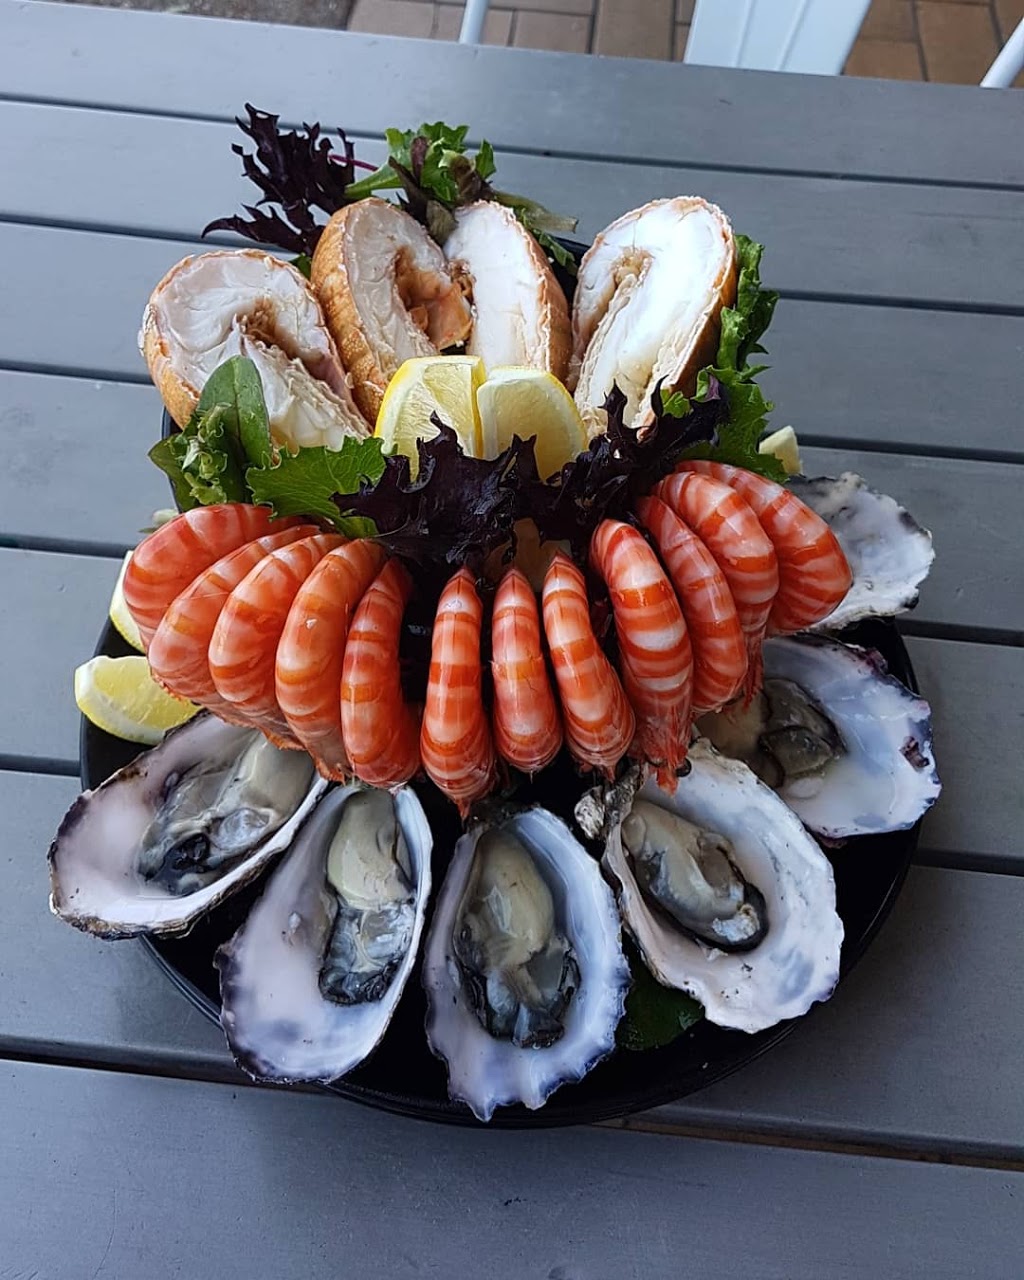 Fish 218 | restaurant | 10/218 Padstow Rd, Eight Mile Plains QLD 4113, Australia | 0733416321 OR +61 7 3341 6321